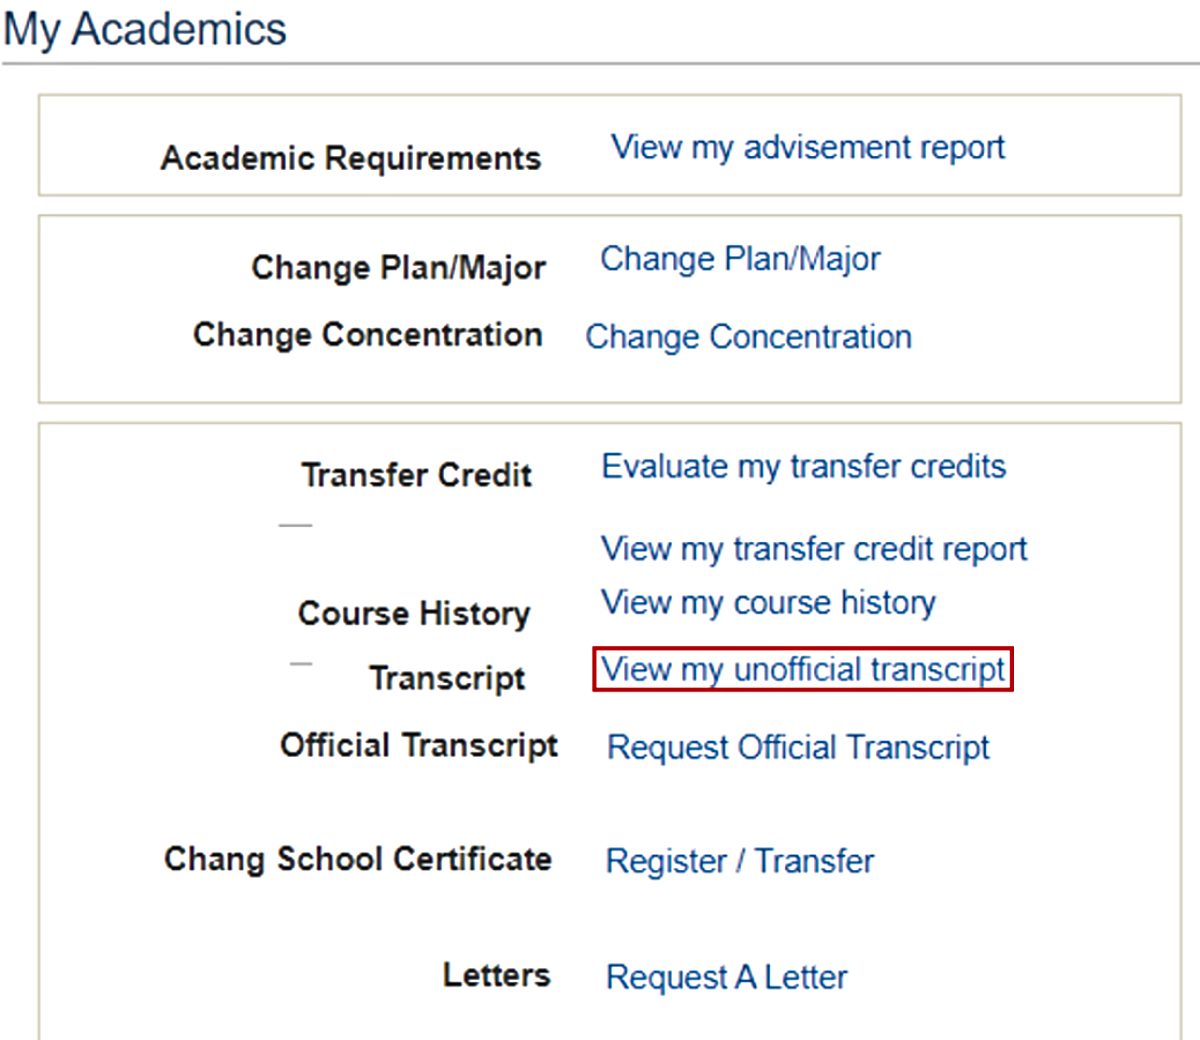 View my unofficial transcript link on My Academics page